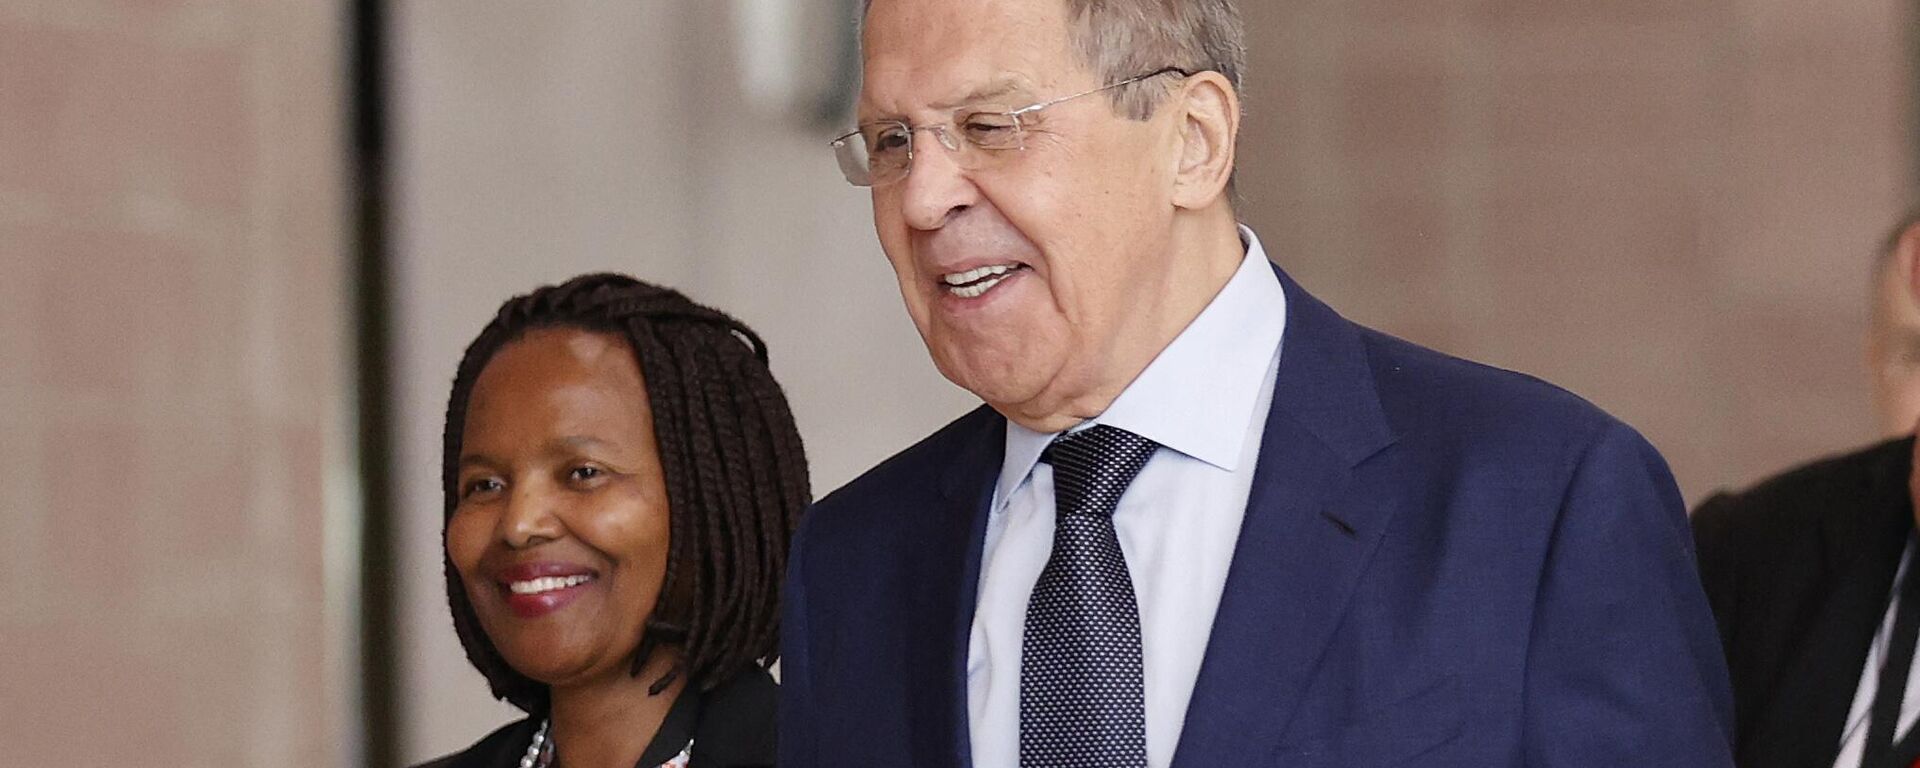 Russian Minister of Foreign Affairs of Sergei Lavrov (R) arrives for a meeting with South African Minister of International Relations and Cooperation Naledi Pandor (not seen) at the OR Tambo Building in Pretoria on January 23, 2023.  - Sputnik International, 1920, 27.01.2023